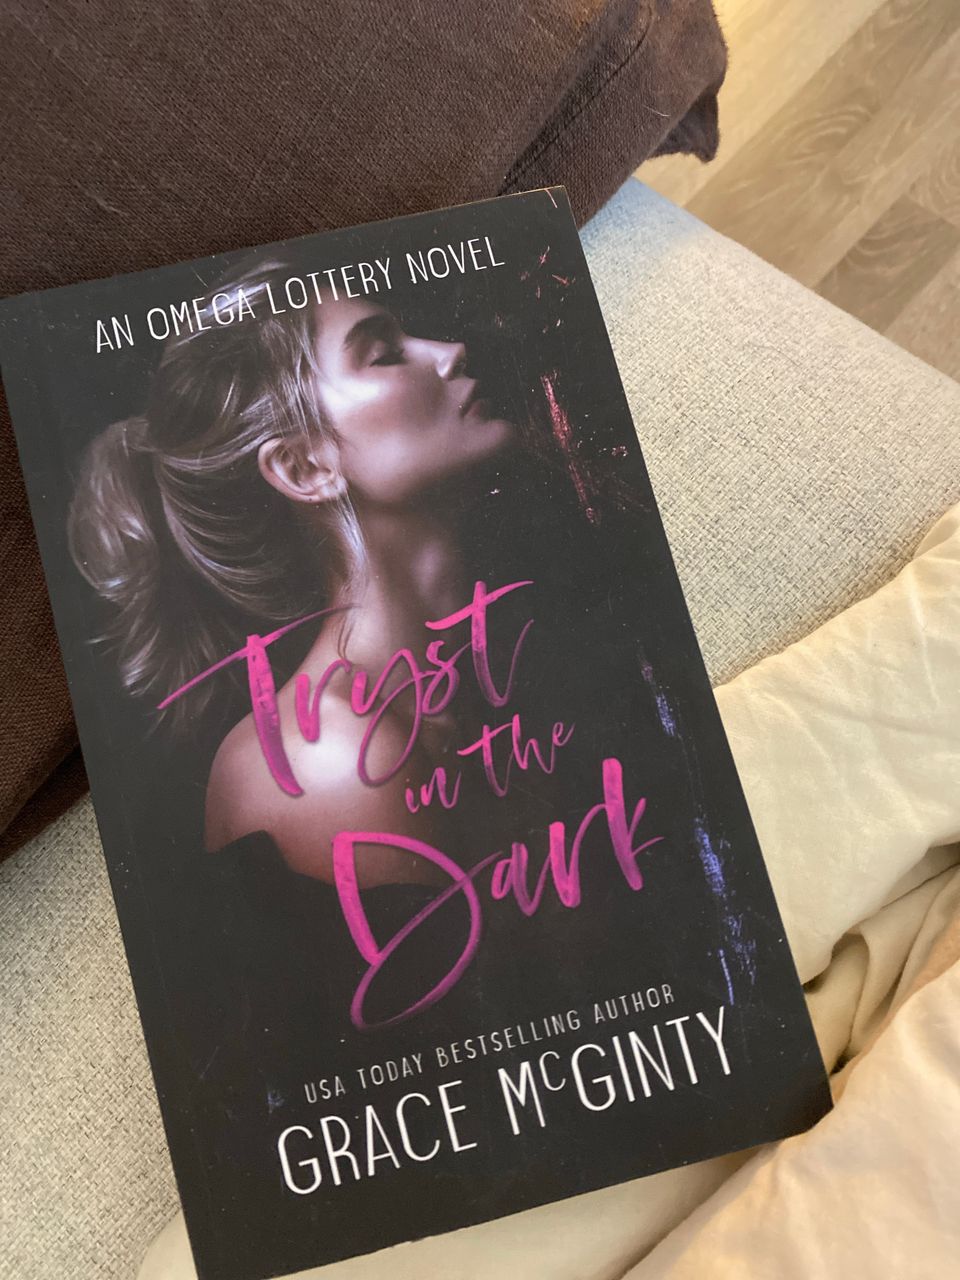 Why choose romance, Tryst in the Dark, Grace McGinty